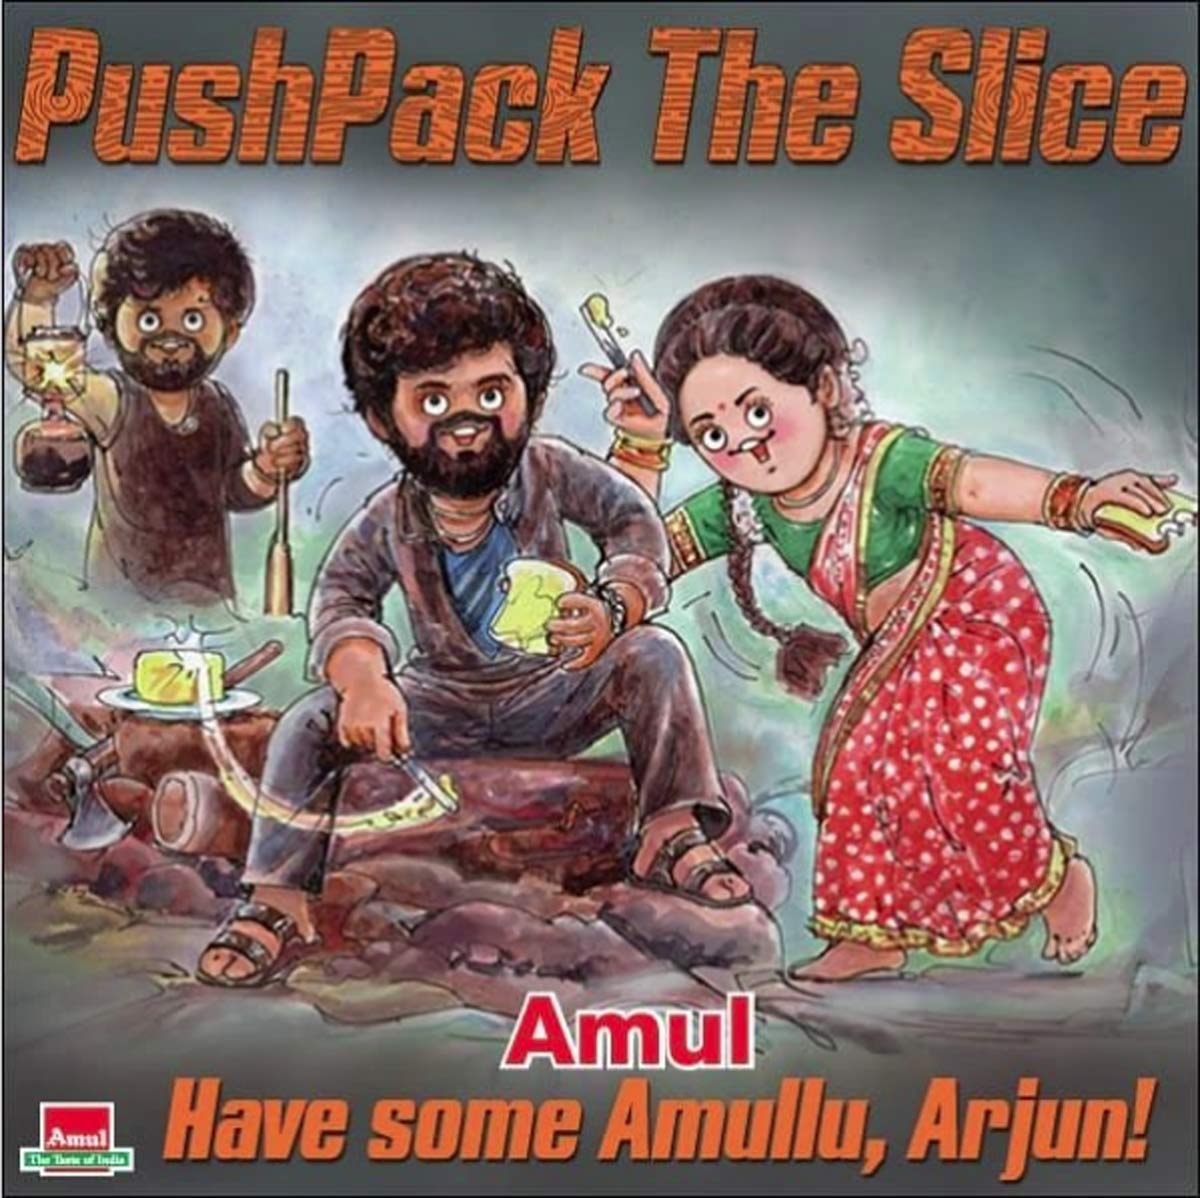 Amul makes a lovely cartoon depicting Pushpa